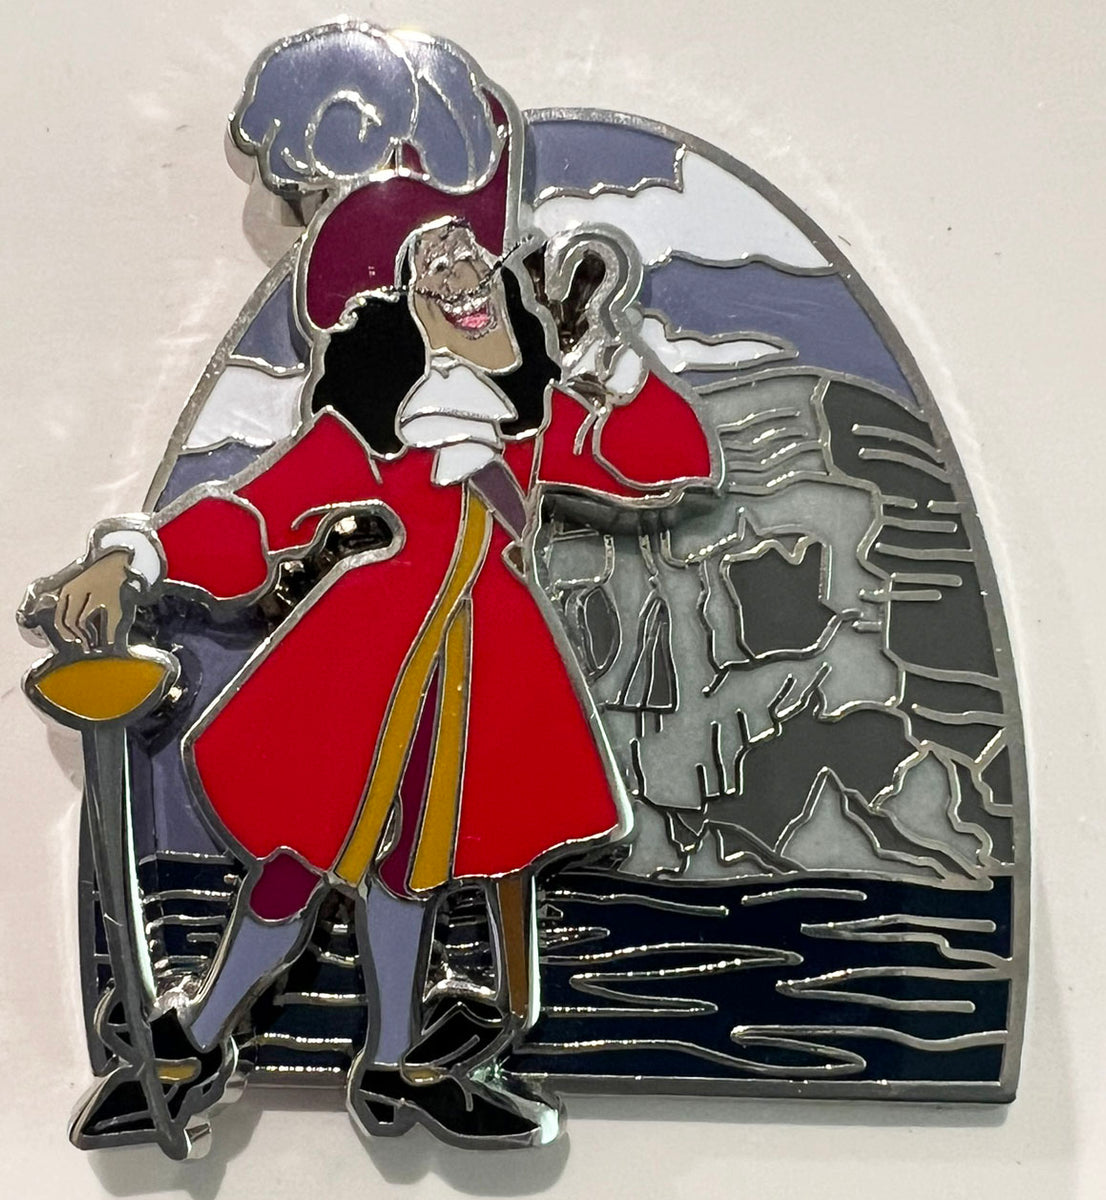 Disney Parks Captain Hook and Mr. Smee Peter Pan 70th Anniversary Pin